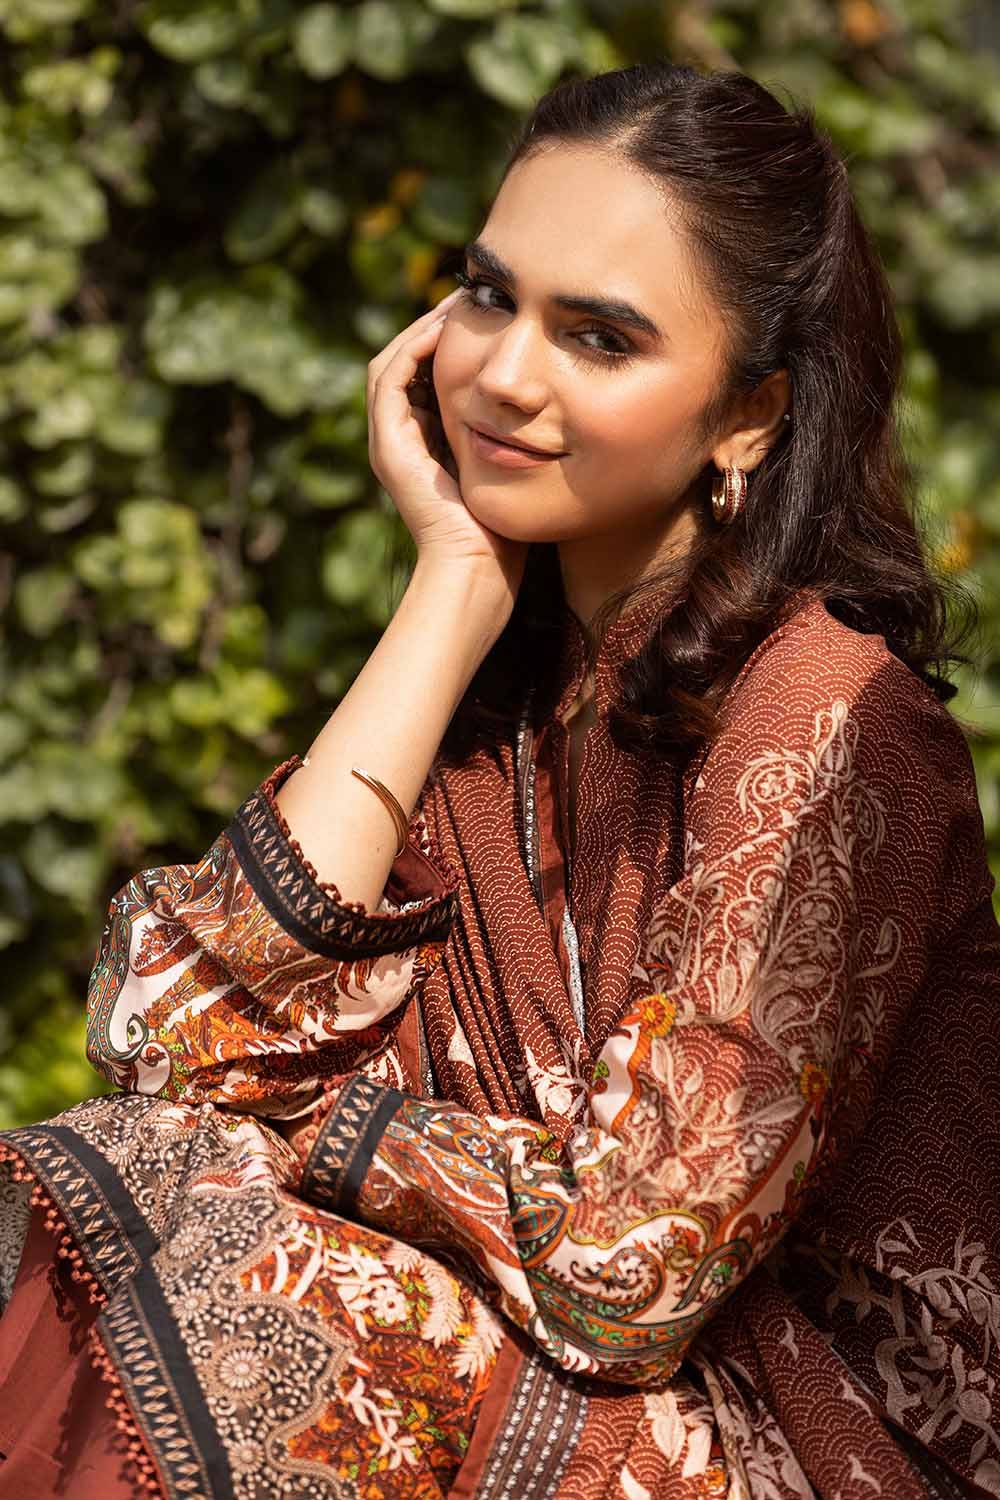 Gul Ahmed 3PC Printed Lawn Unstitched Suit CL-32526